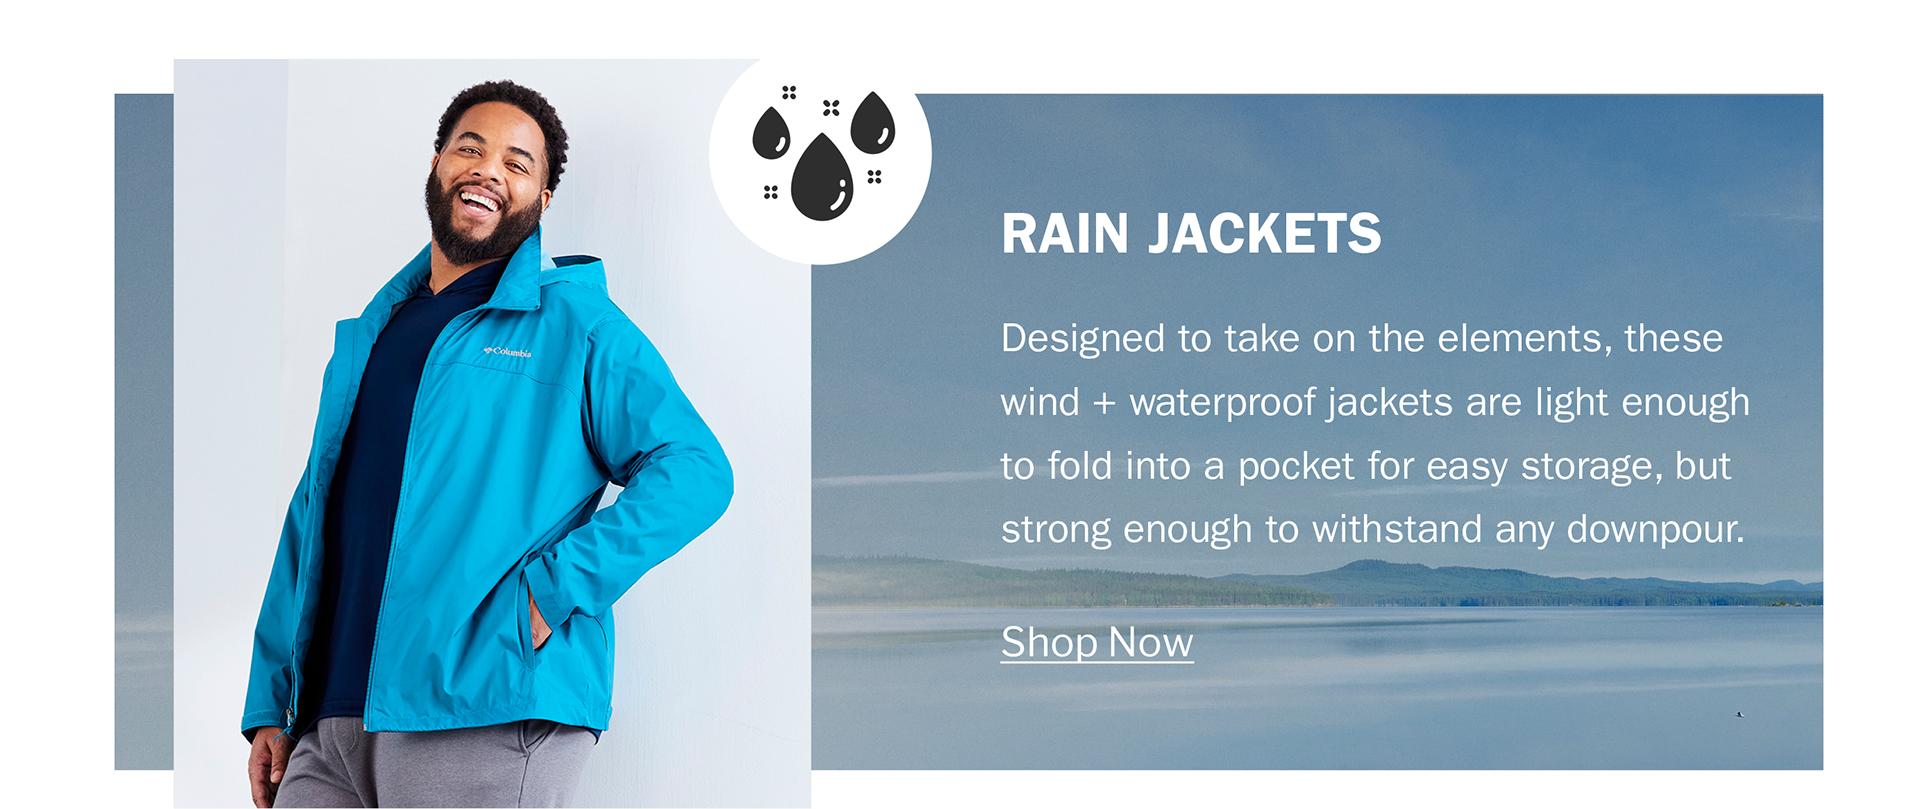 RAIN JACKETS | Designed to take on the elements, these wind + waterproof jackets are light enough to fold into a pocket for easy storage, but strong enough to withstand any downpour. | Shop Now